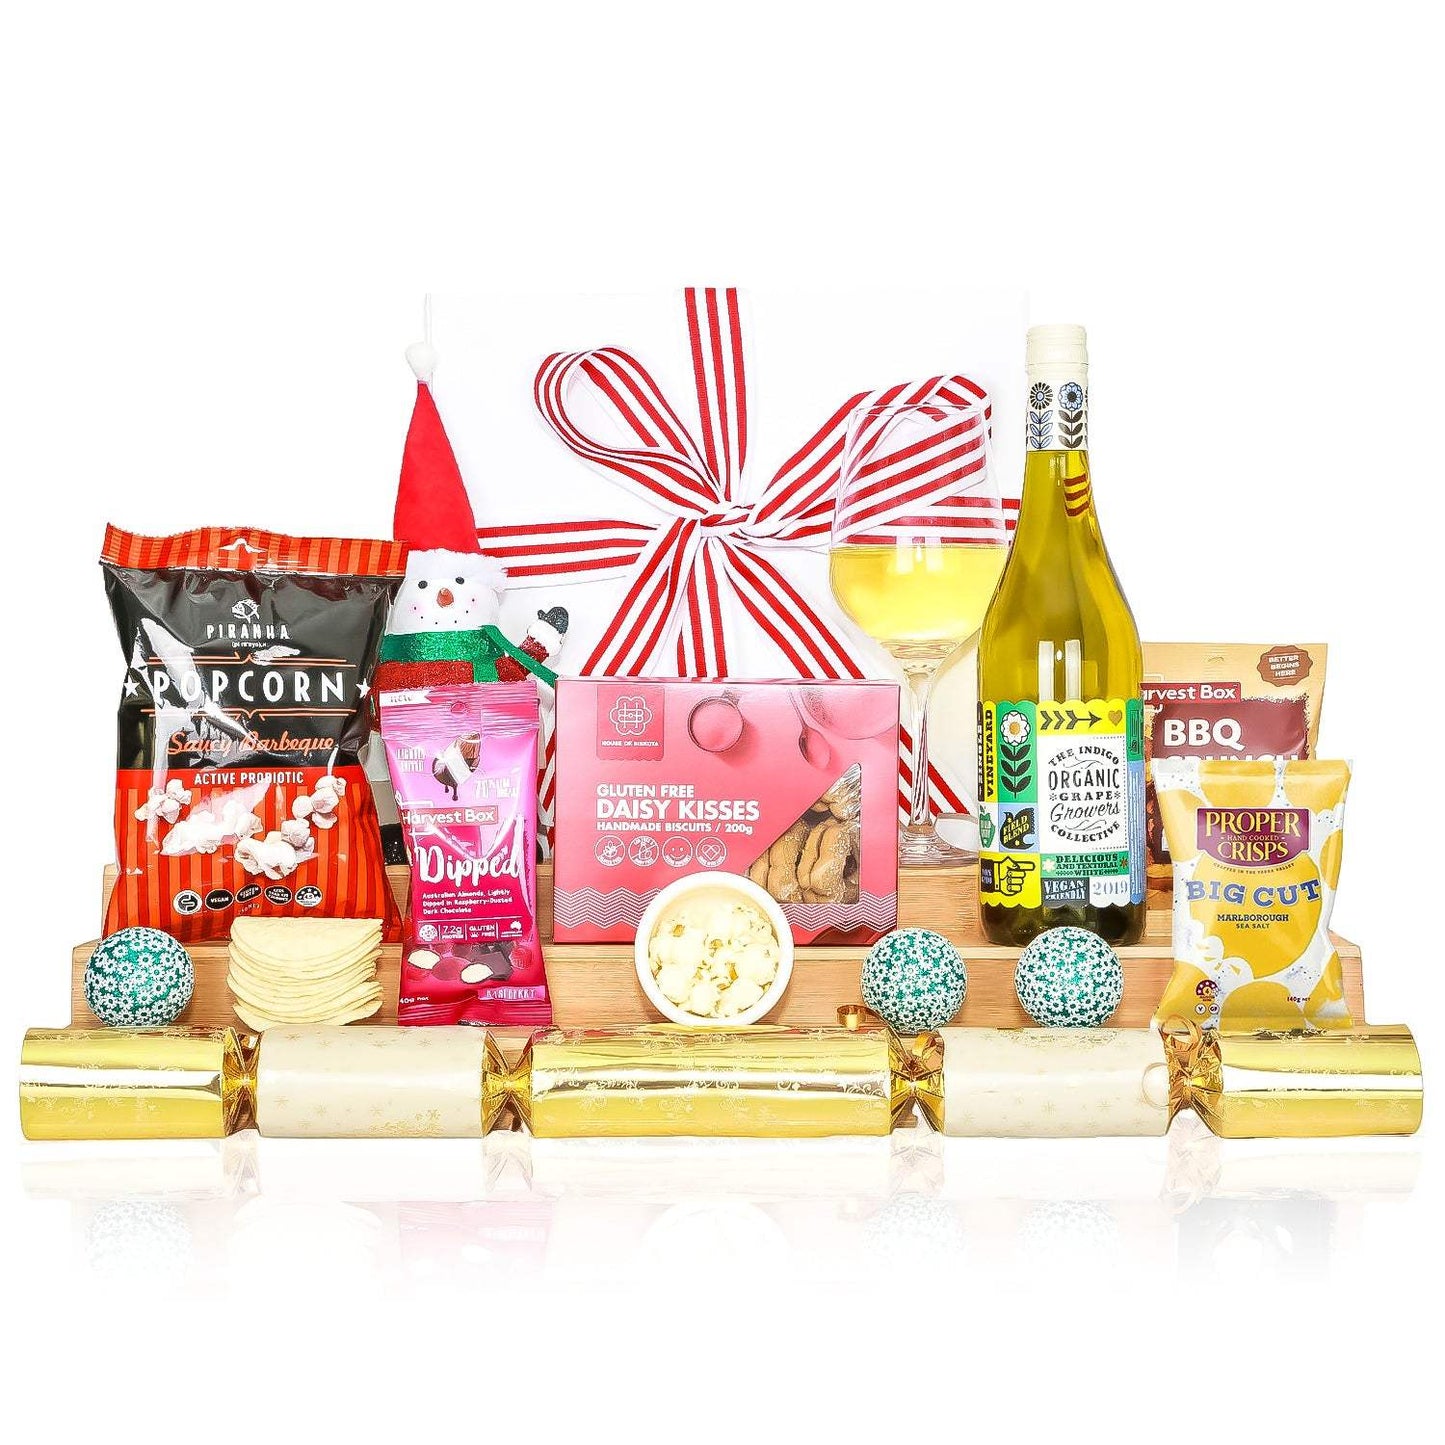 The Taste of Christmas - Healthy Belly Hampers - pure indulgence - birthday hampers - gift hampers - gift hampers melbourne - gift hampers australia - organic hampers -vegan hampers - gluten free hampers - birthday hampers -anniversary hampers - wedding hampers - alcohol hampers